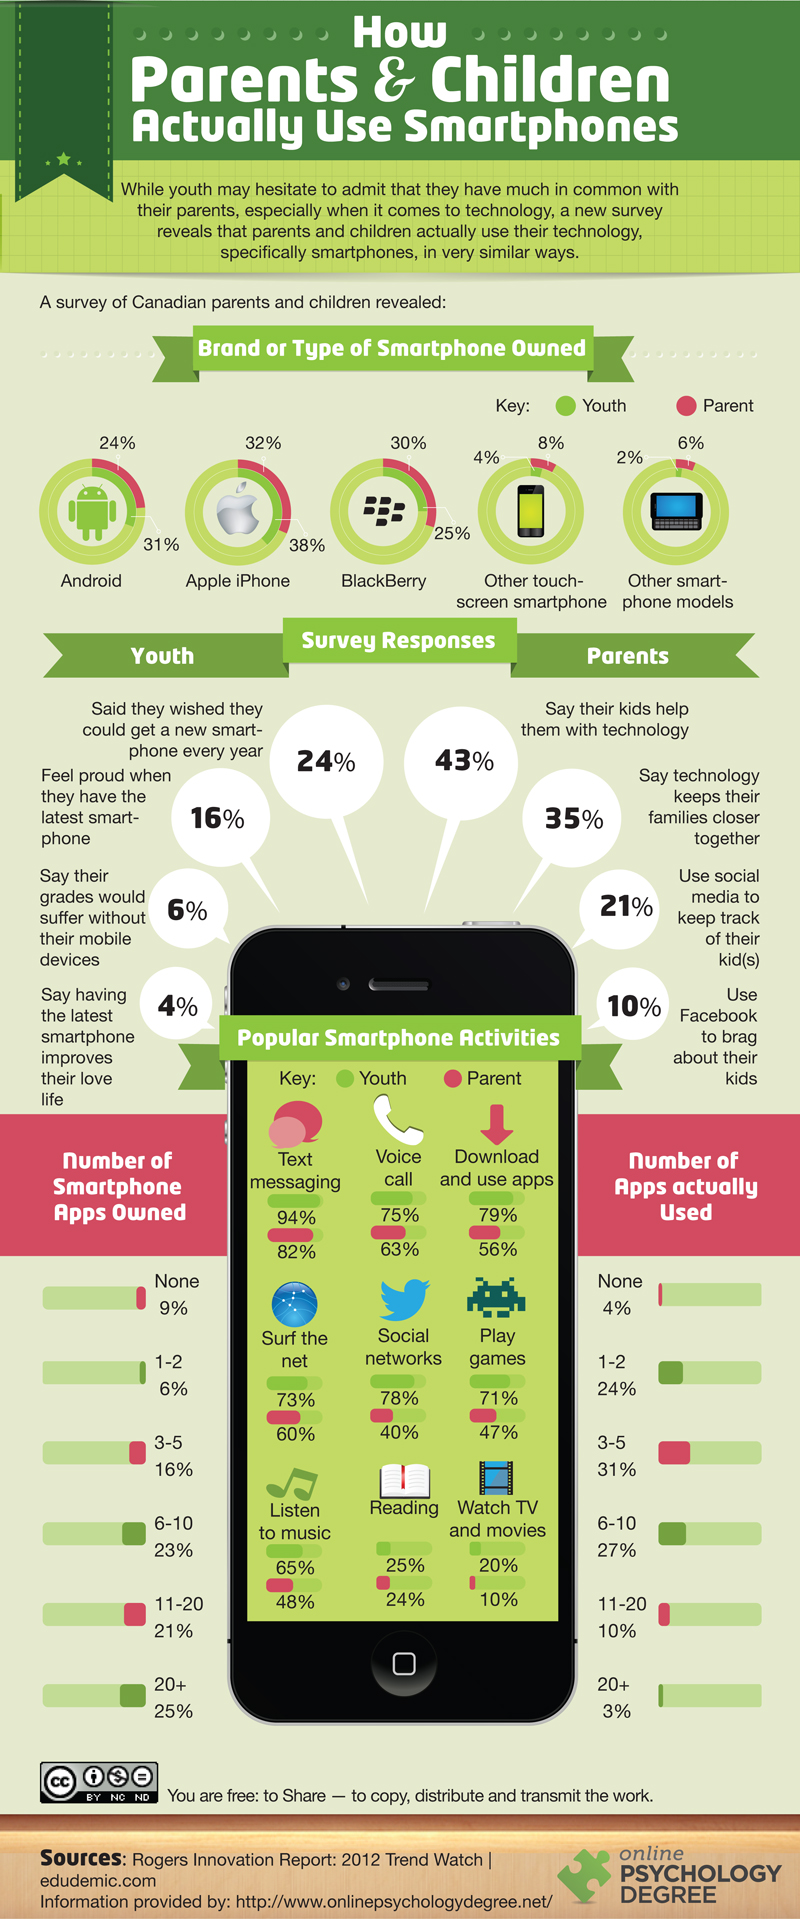 How Parents and Children Actually Use Smartphones